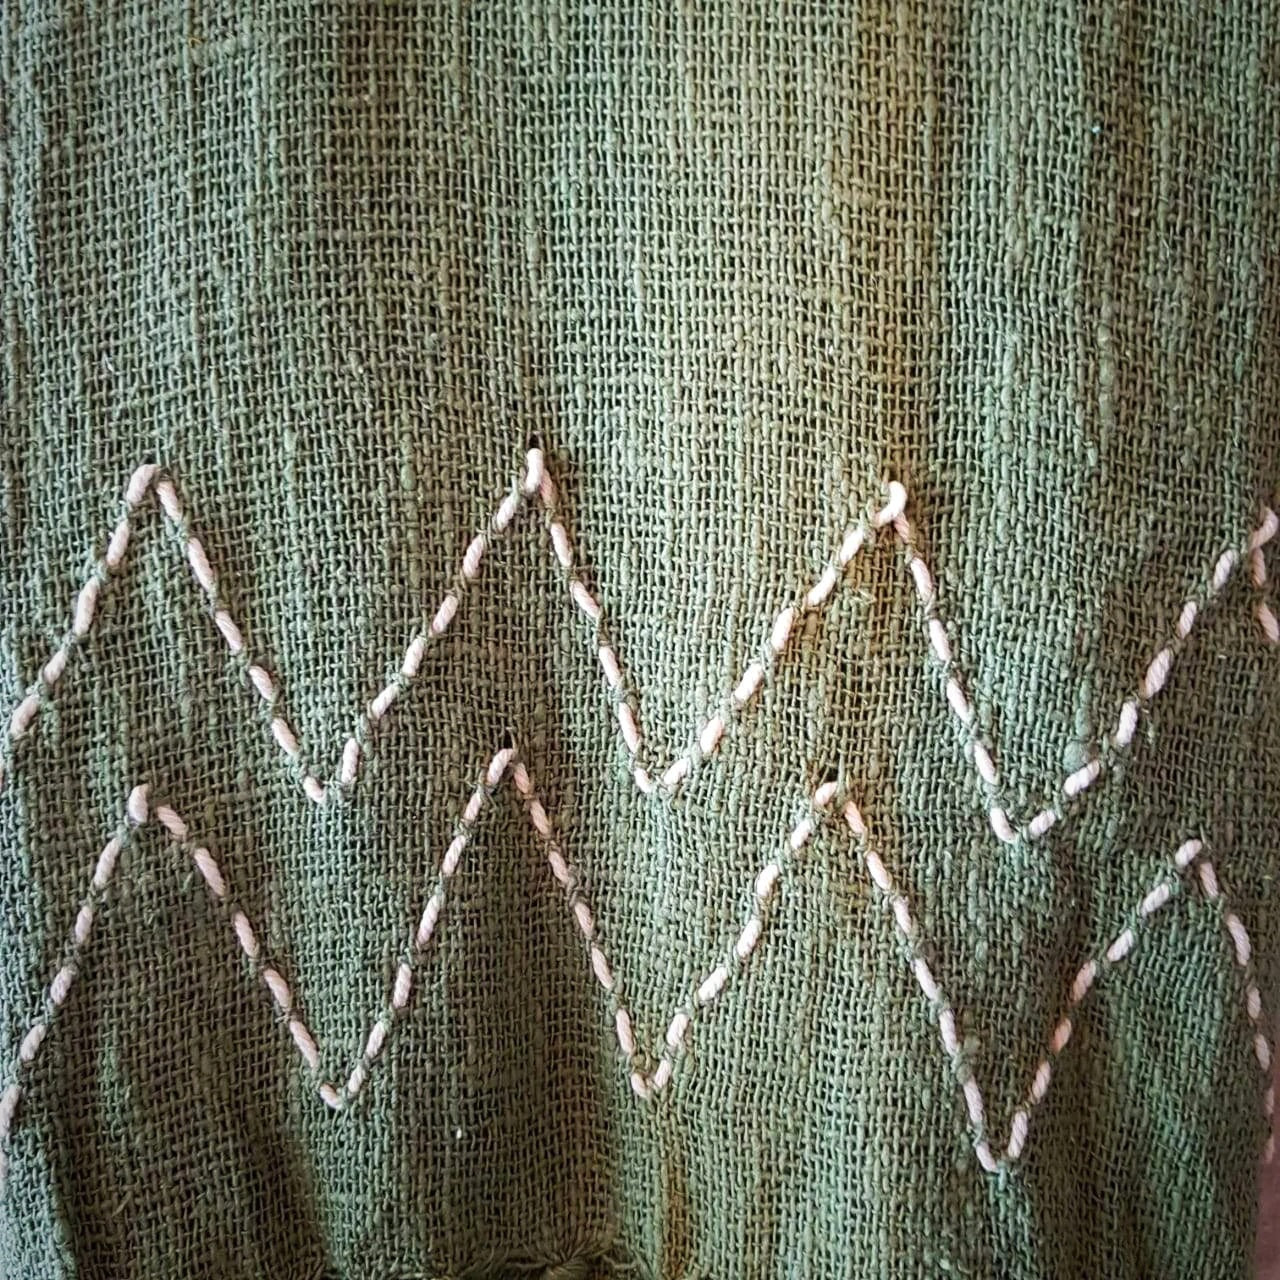 Soft Army Green Hand Stitched Throw Blanket